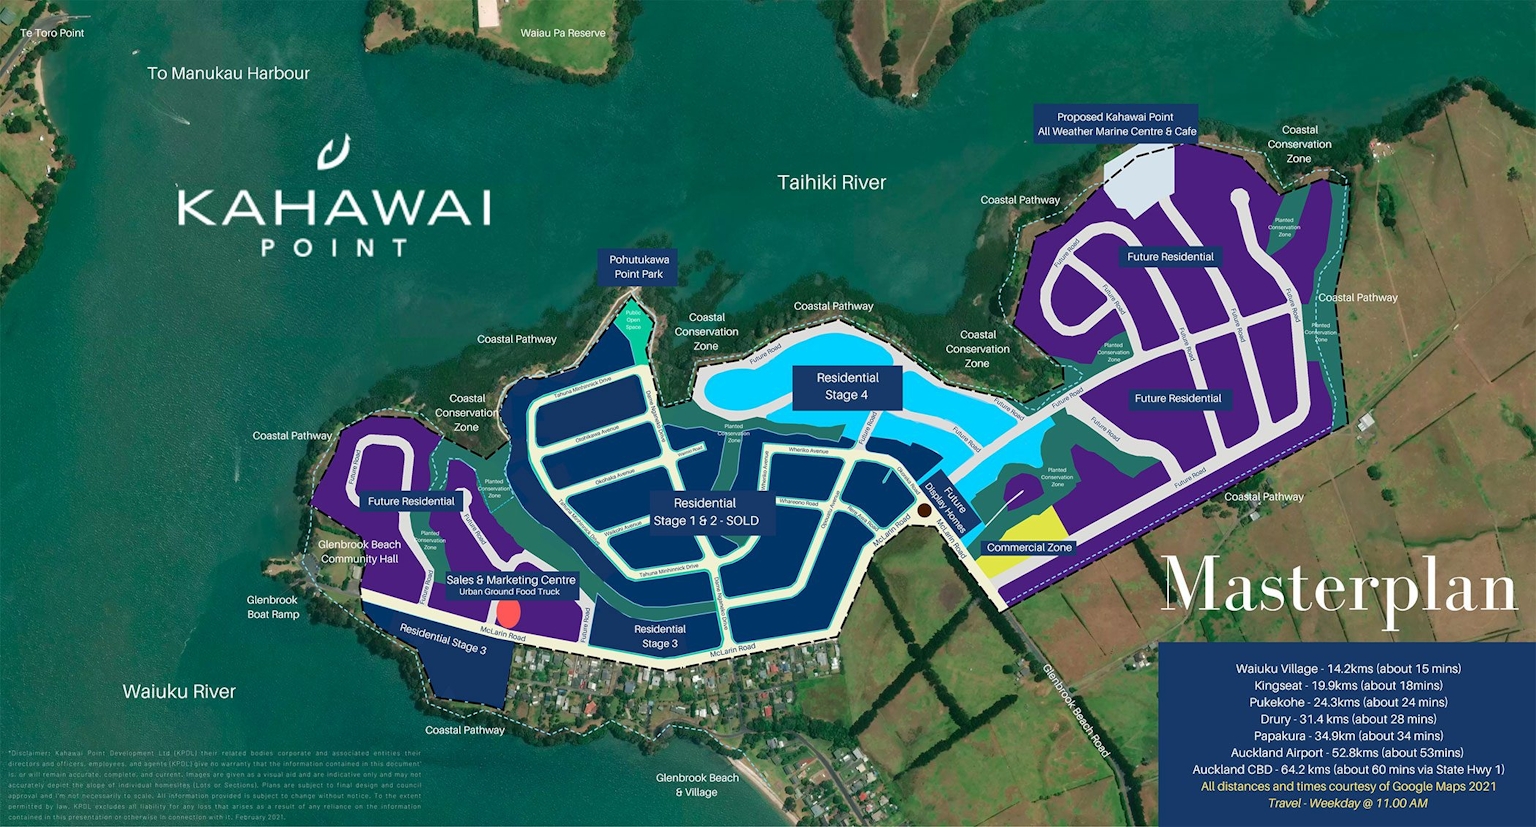 Kahawai Point stages image